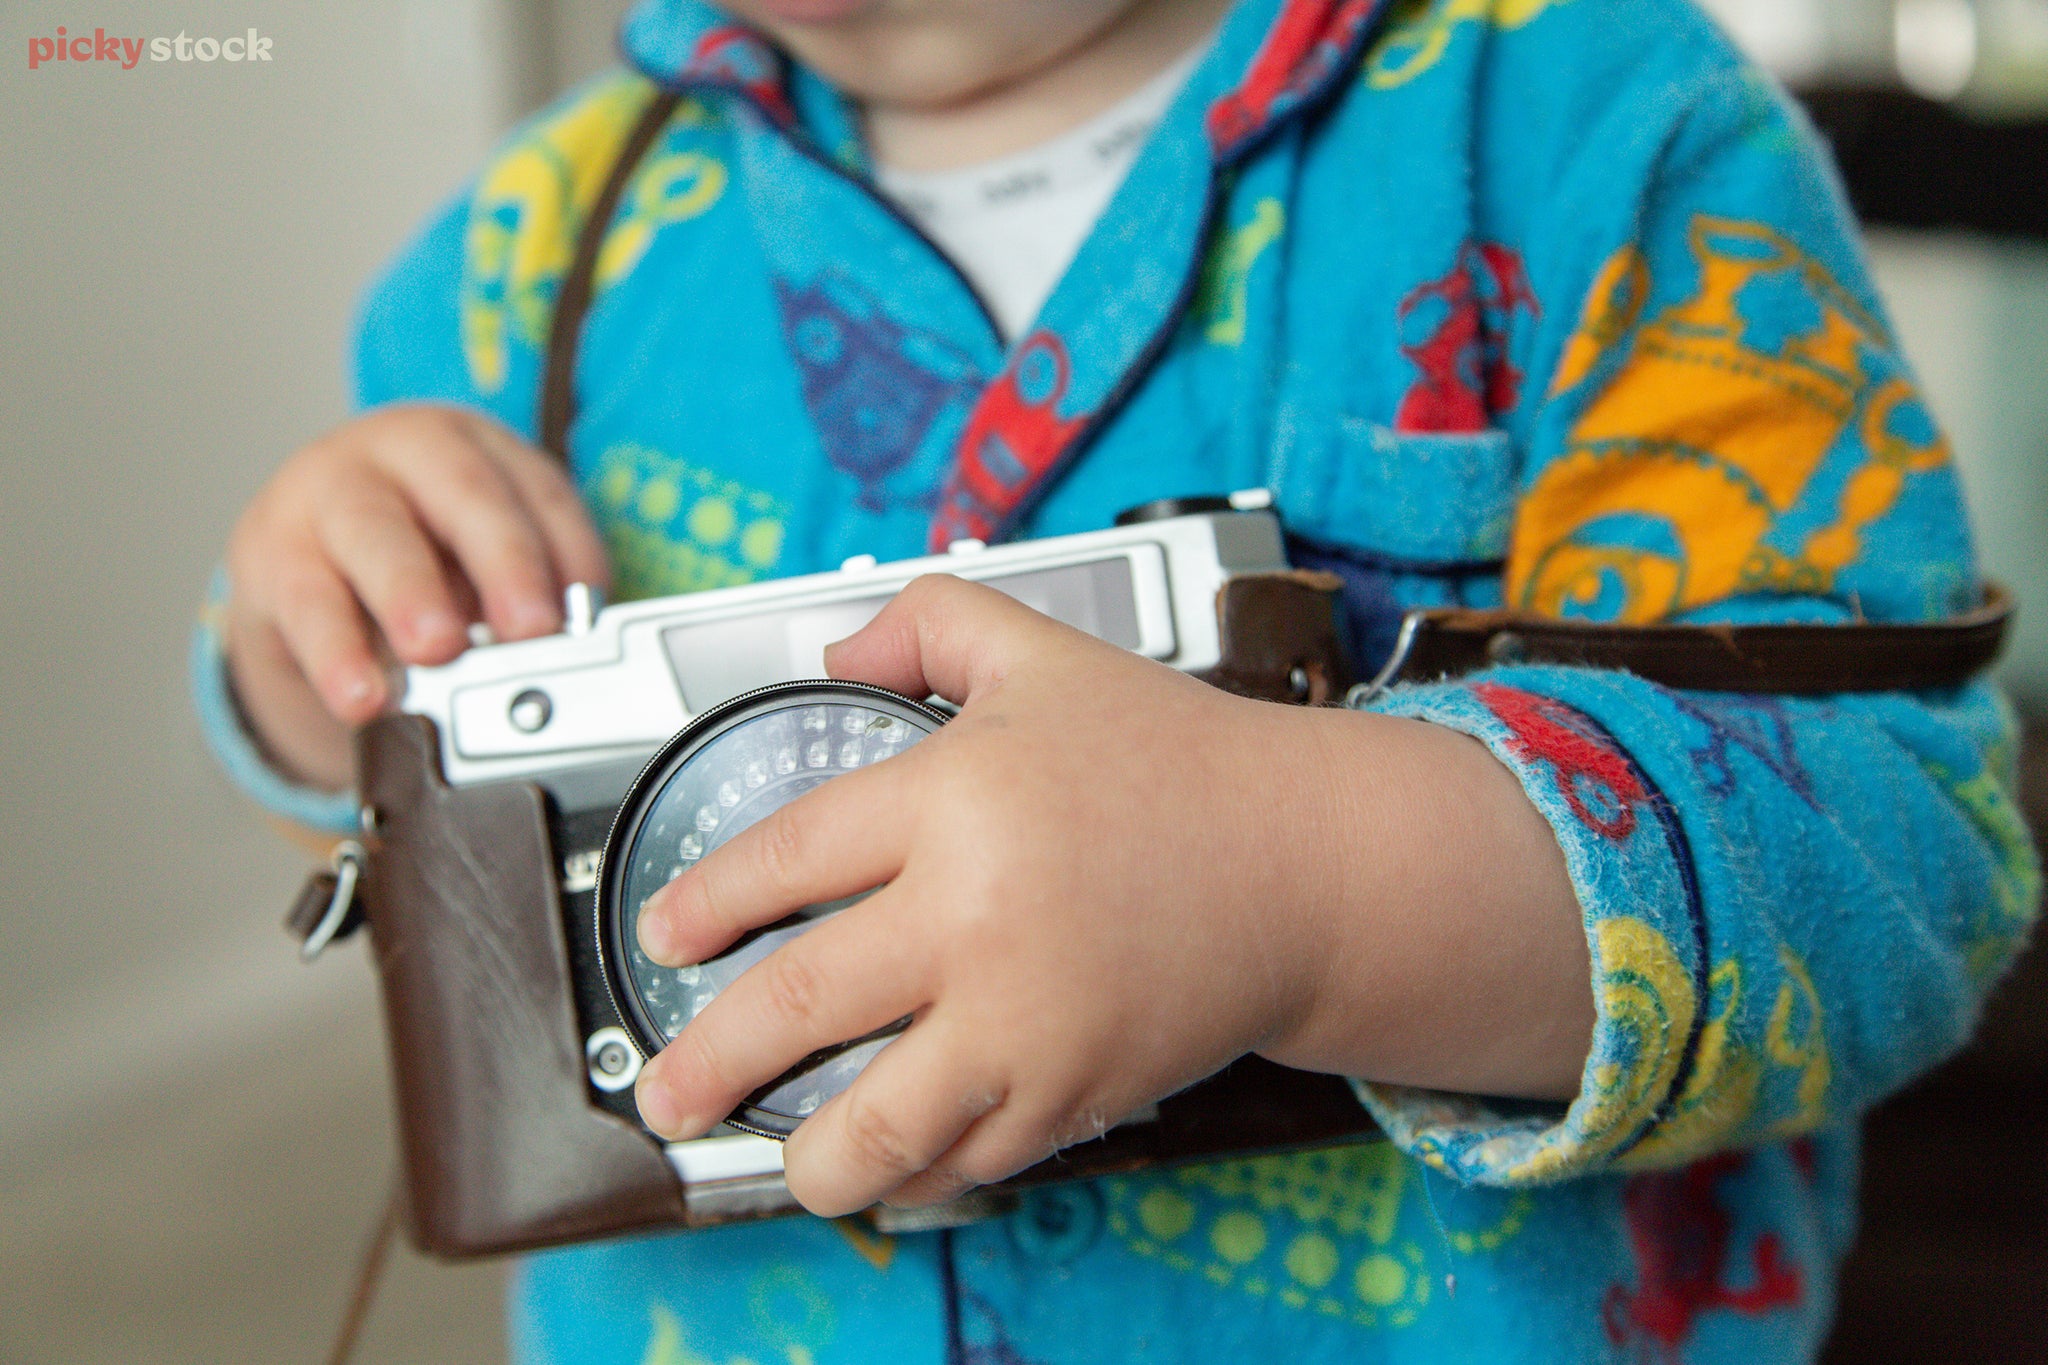 Landscape close up of an infant in pajamas holding a mechanical camera in a leather holster.